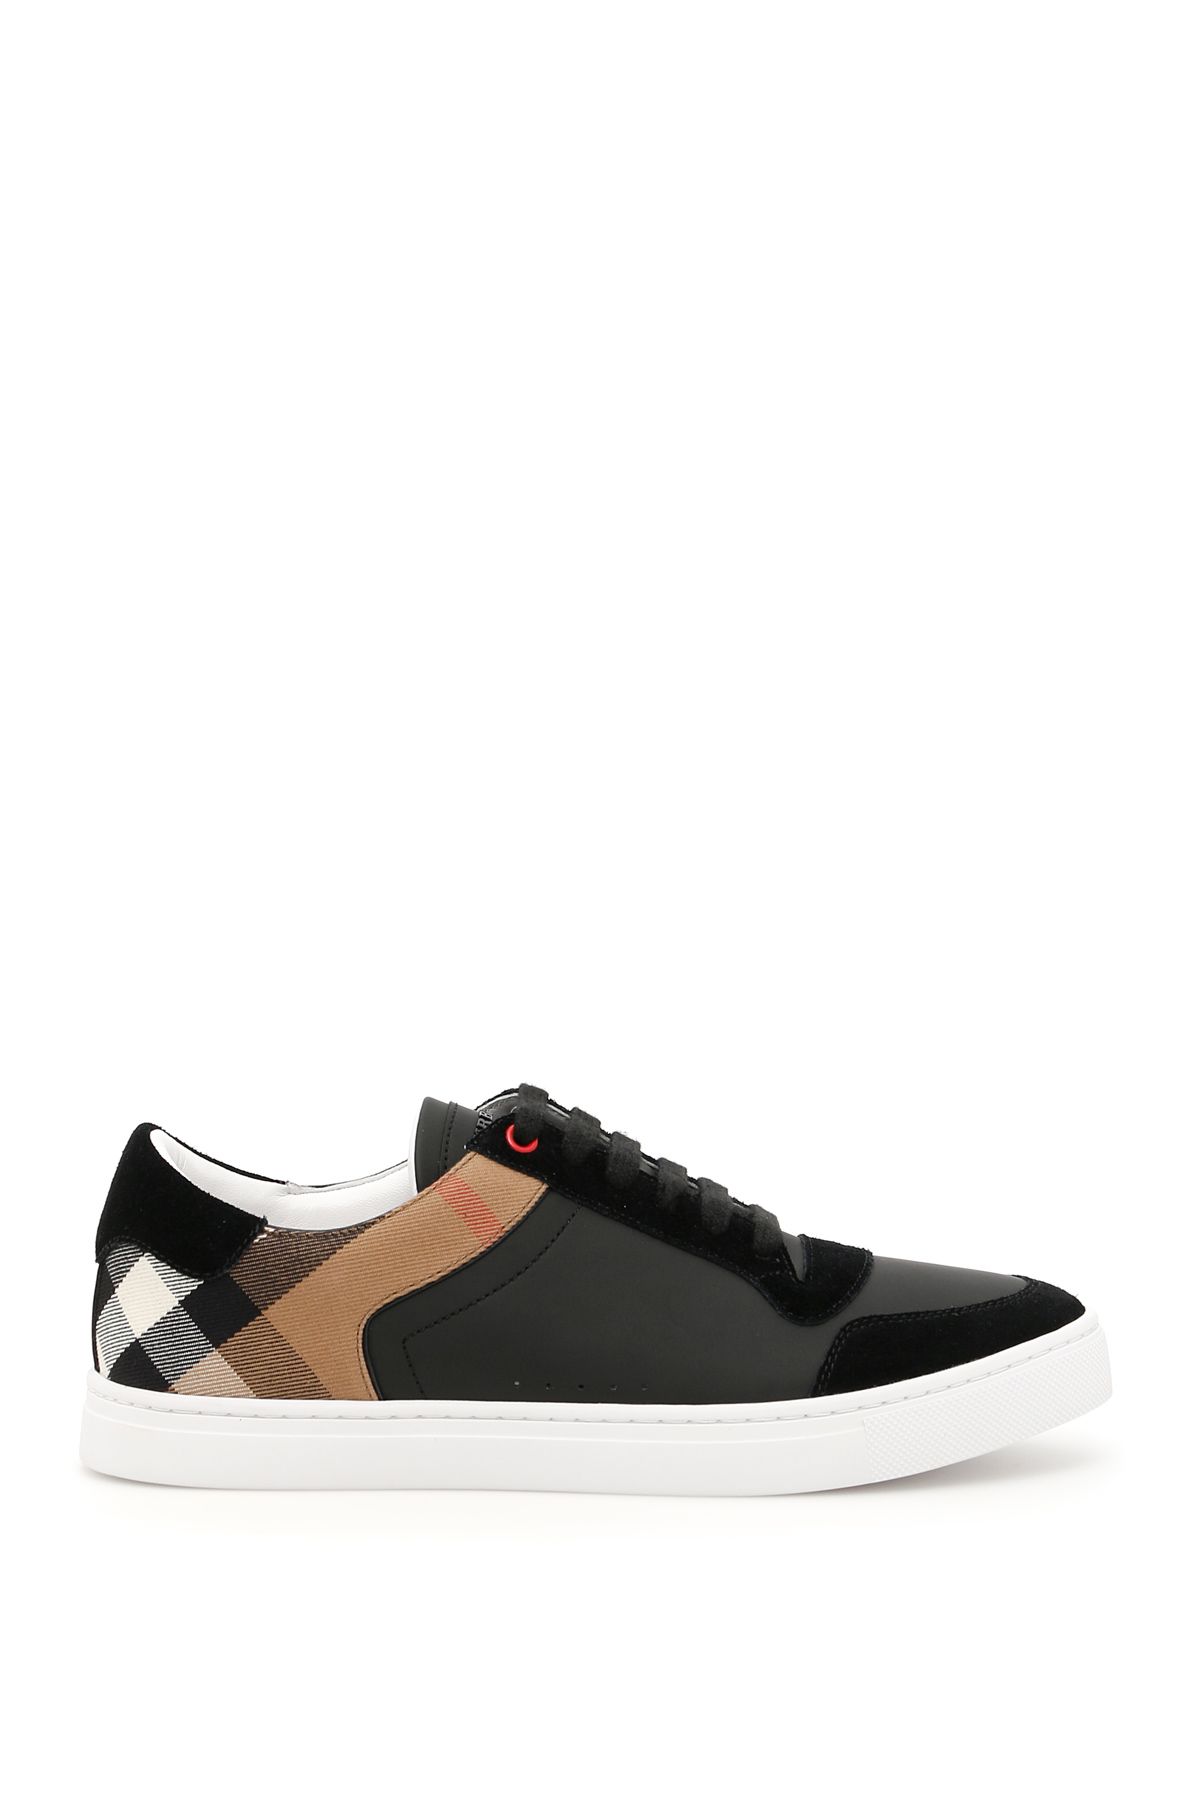 burberry sneakers mens for sale